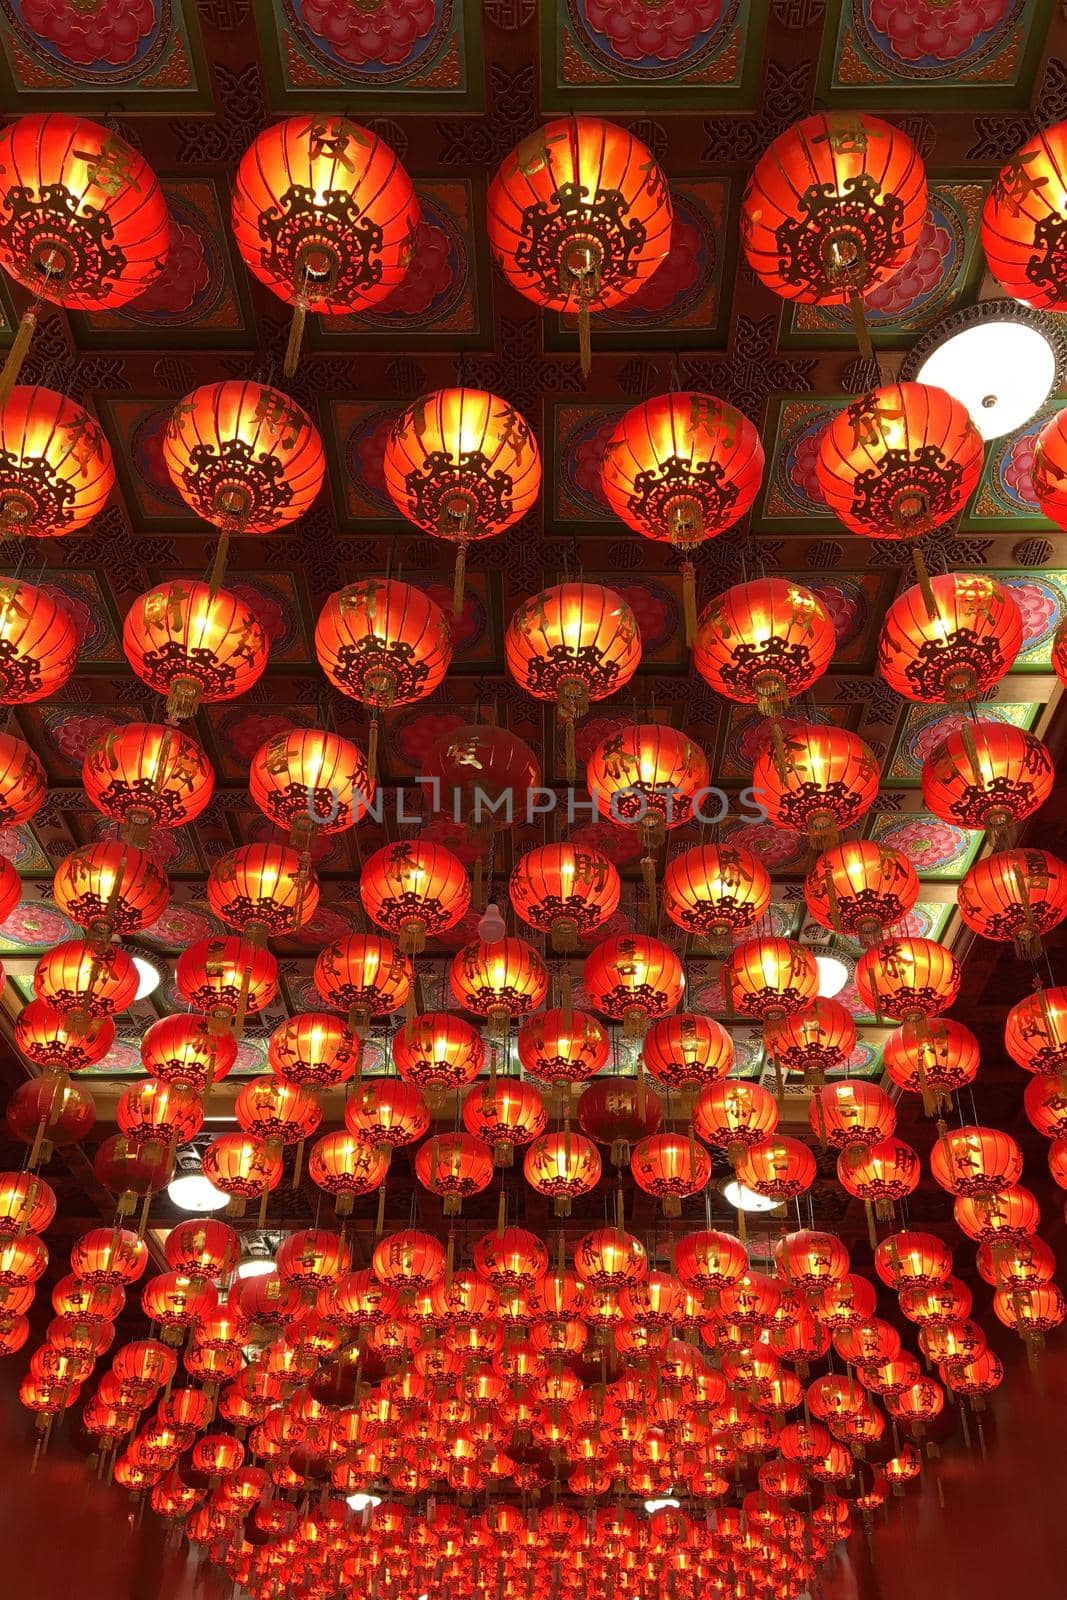 Chinese Red lanterns in china town preparation for the upcoming Chinese New Year by Nuamfolio